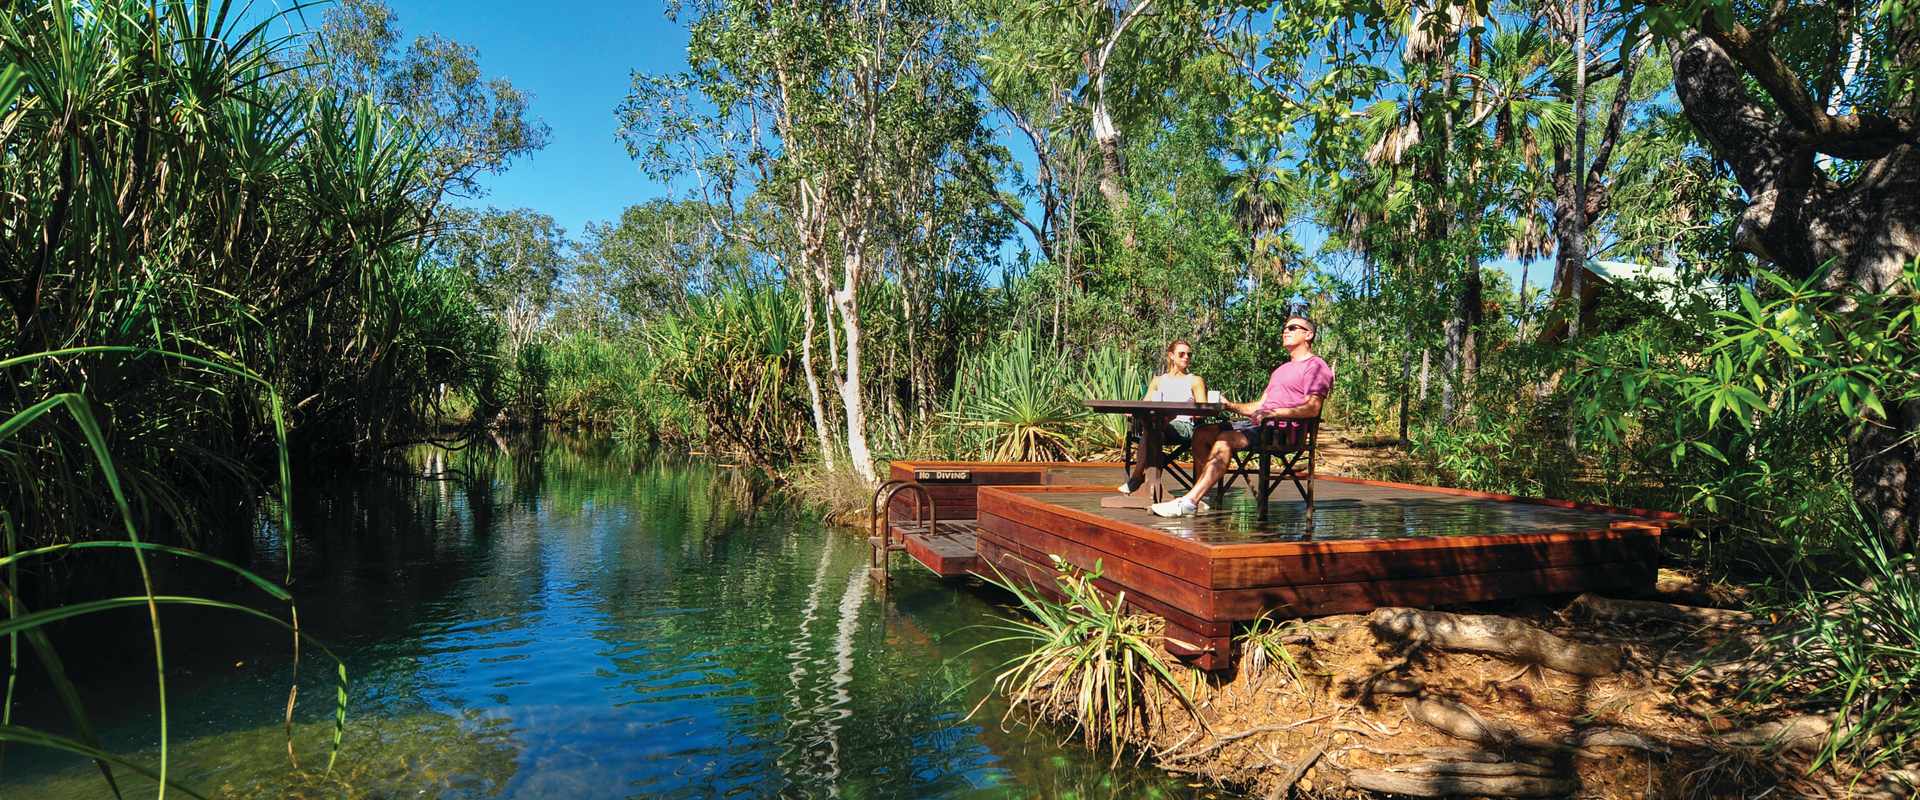 Couple sitting on deck overlooking the stream fringed with trees